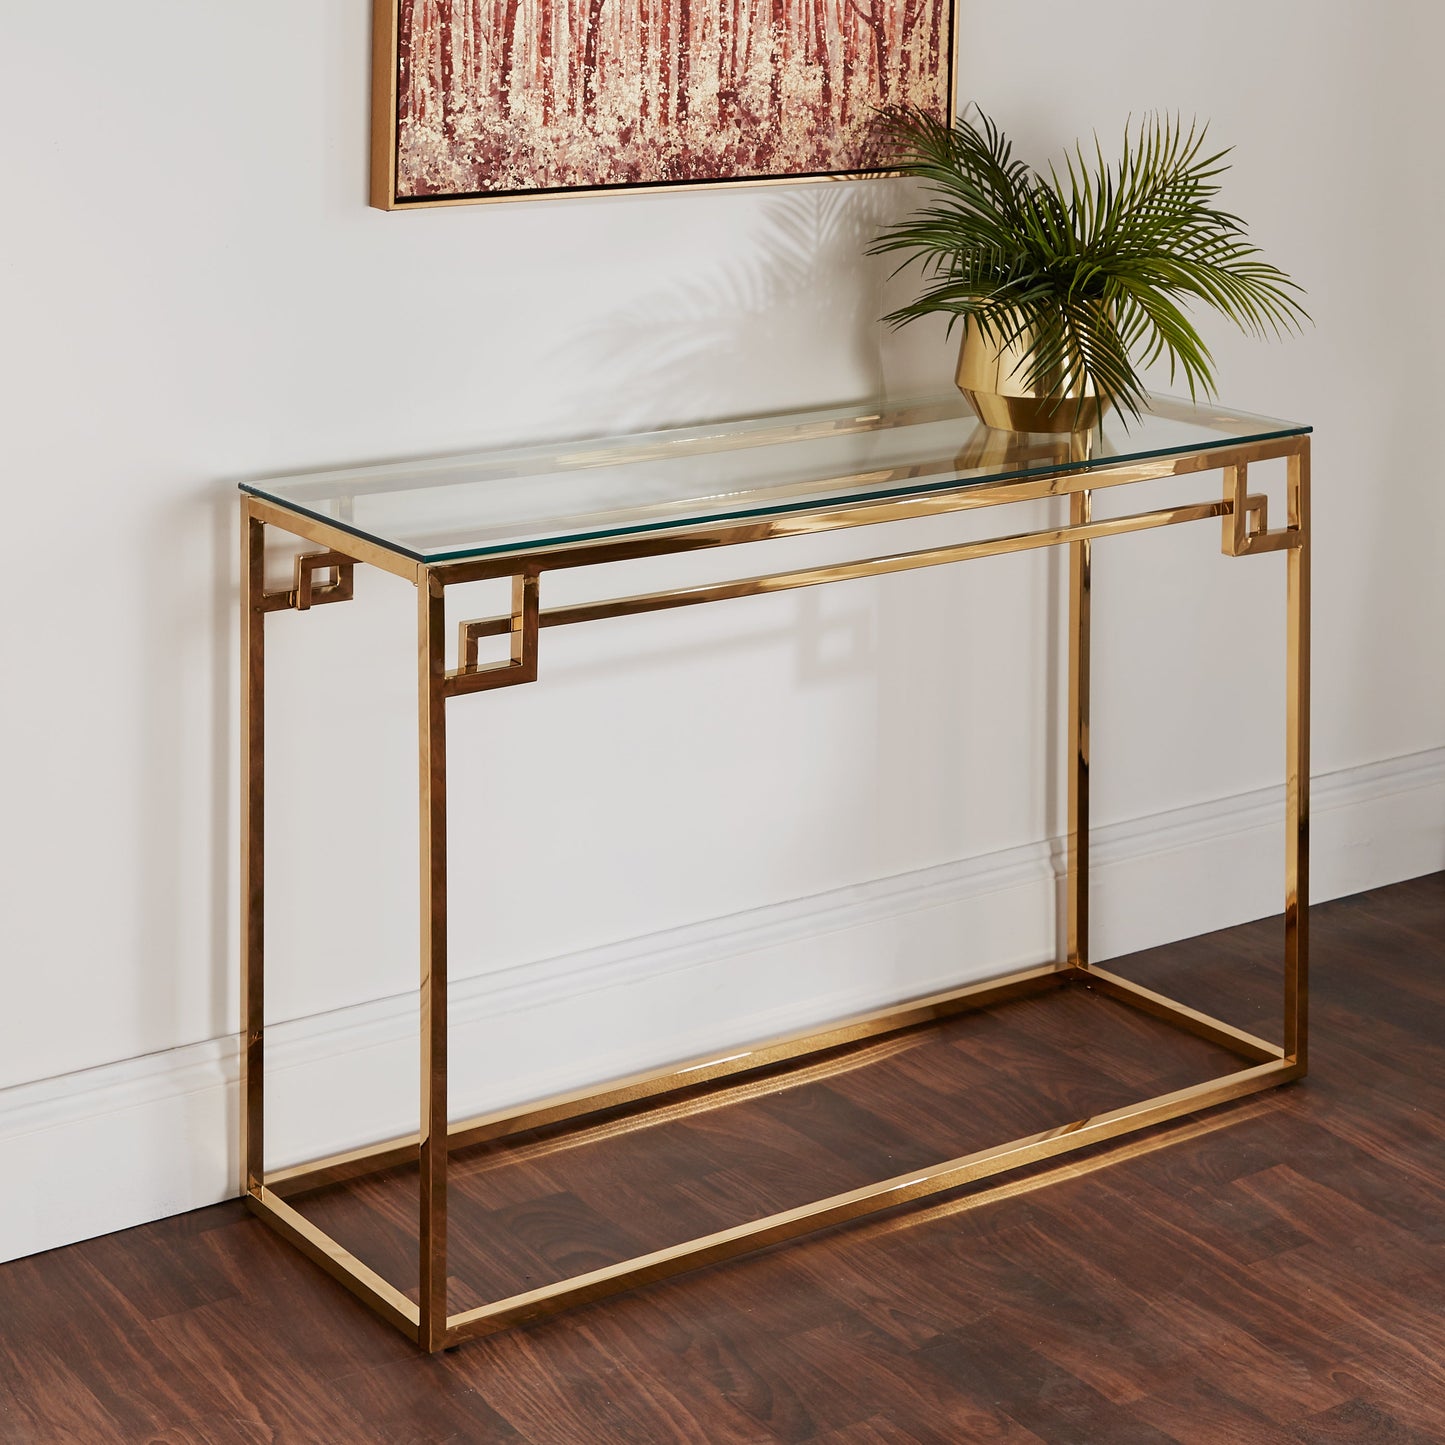 Cesar gold console table by Native